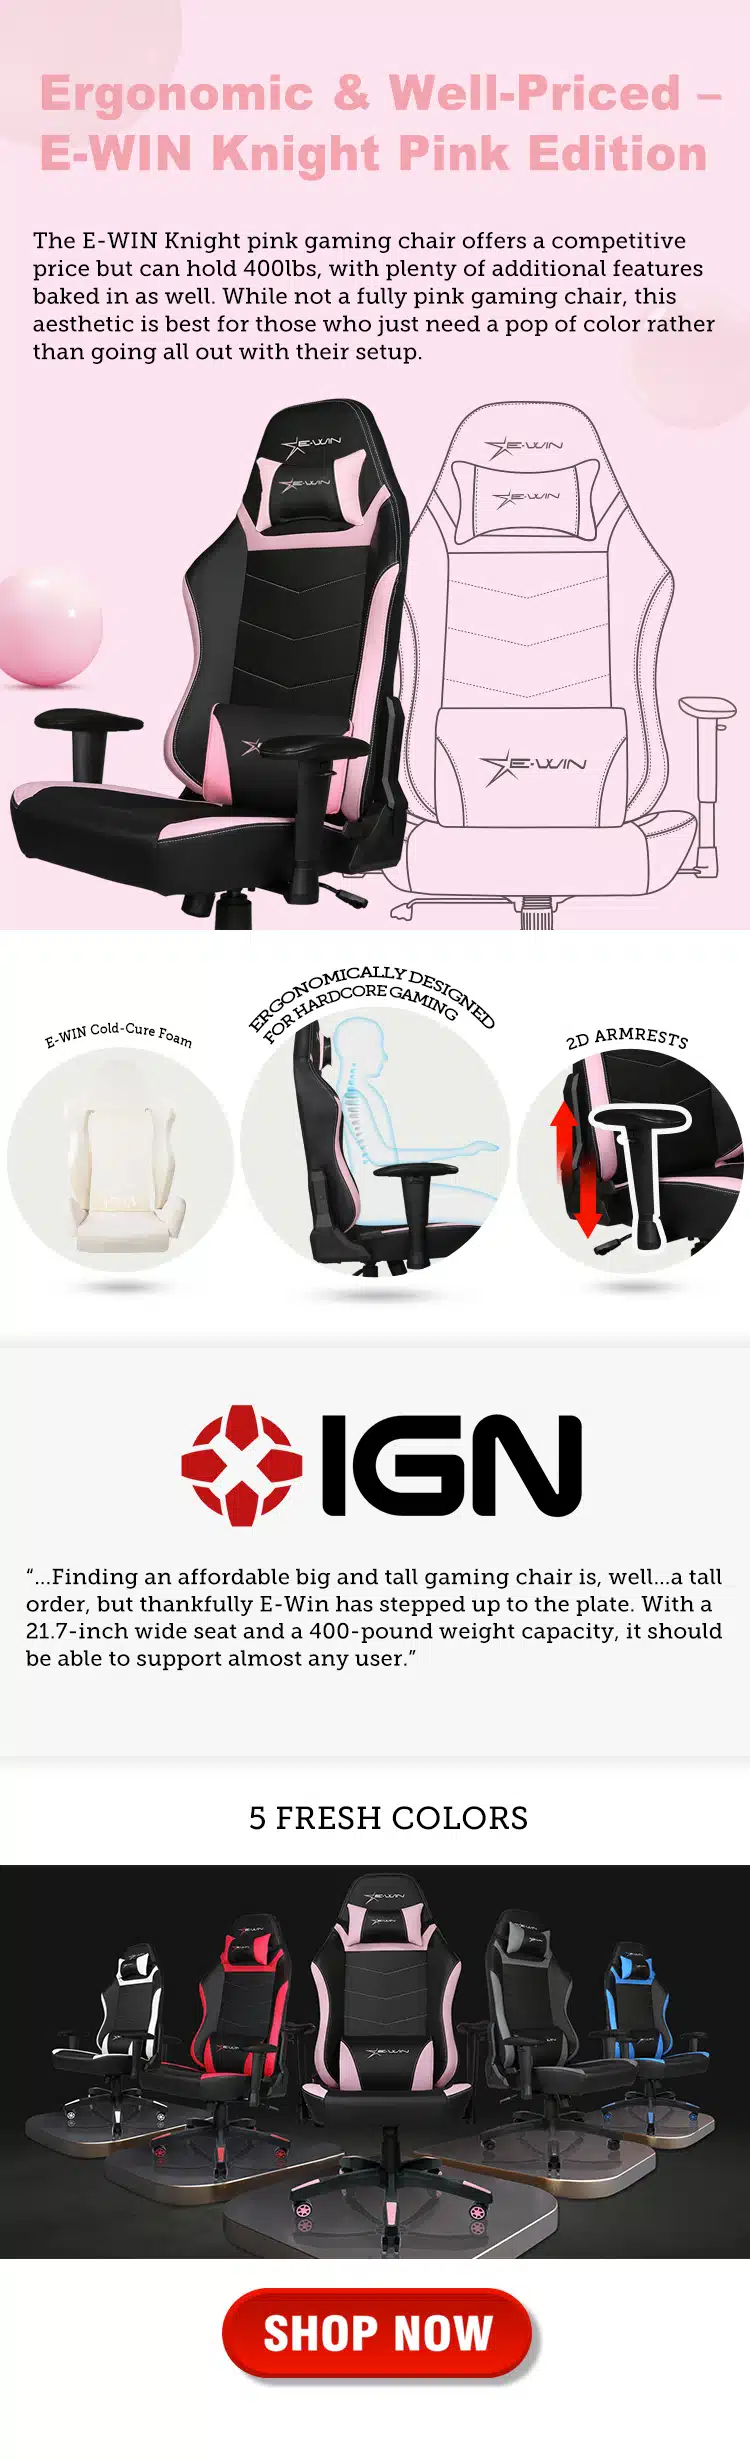 E-WIN Knight Series Pink Gaming Chair